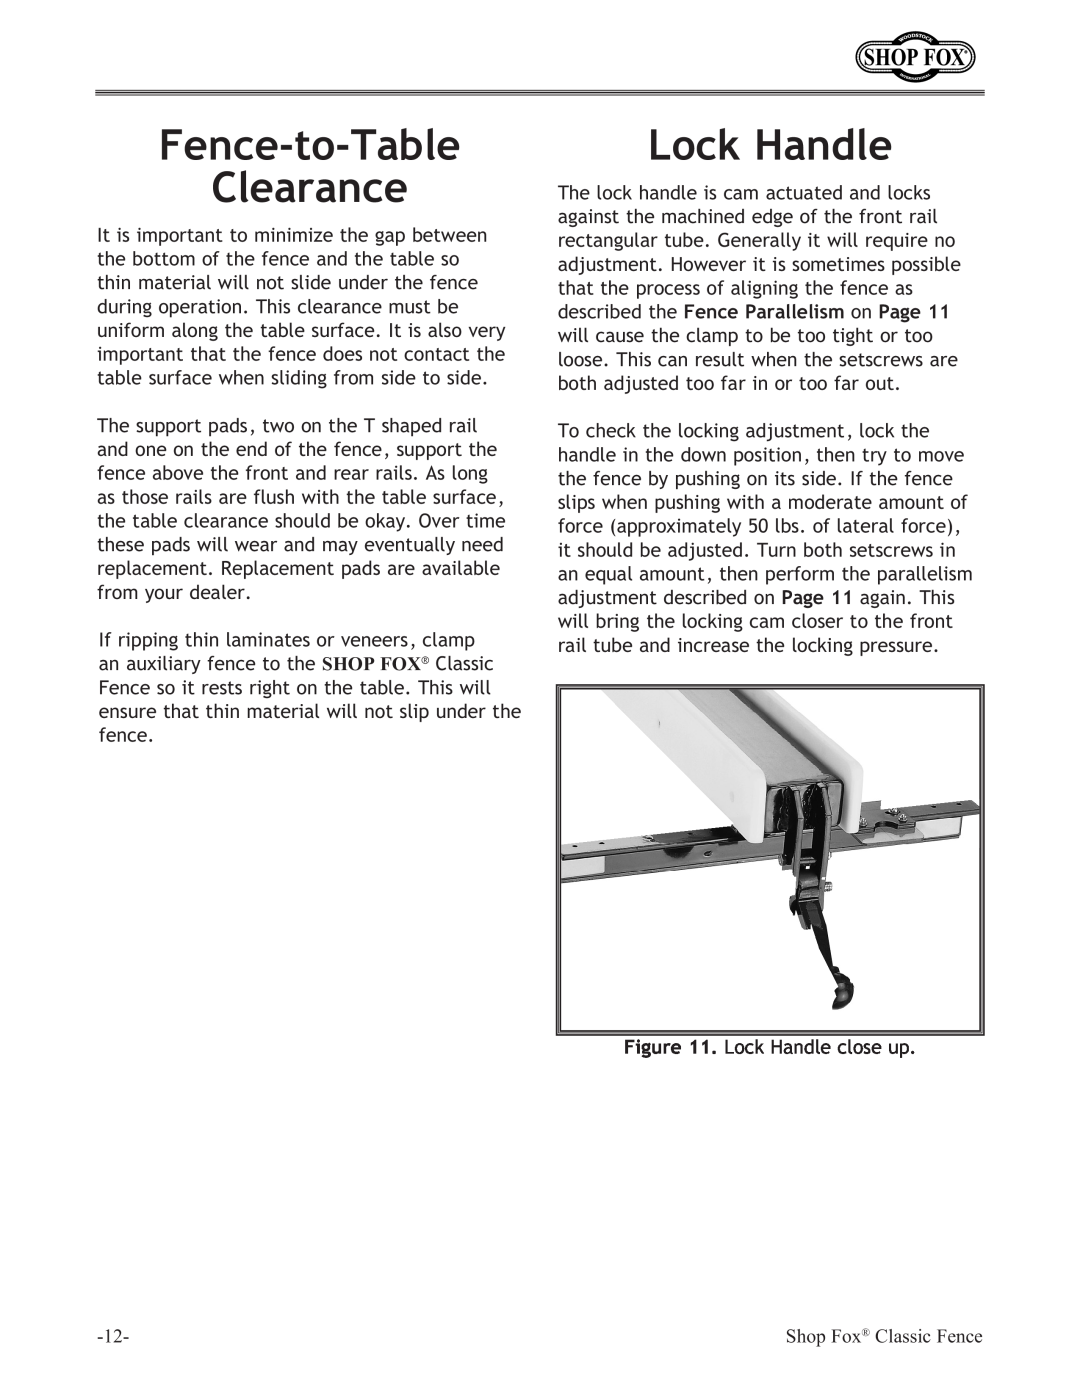 Woodstock W2006, W2005, W2007 instruction manual Fence-to-Table Clearance, Lock Handle 